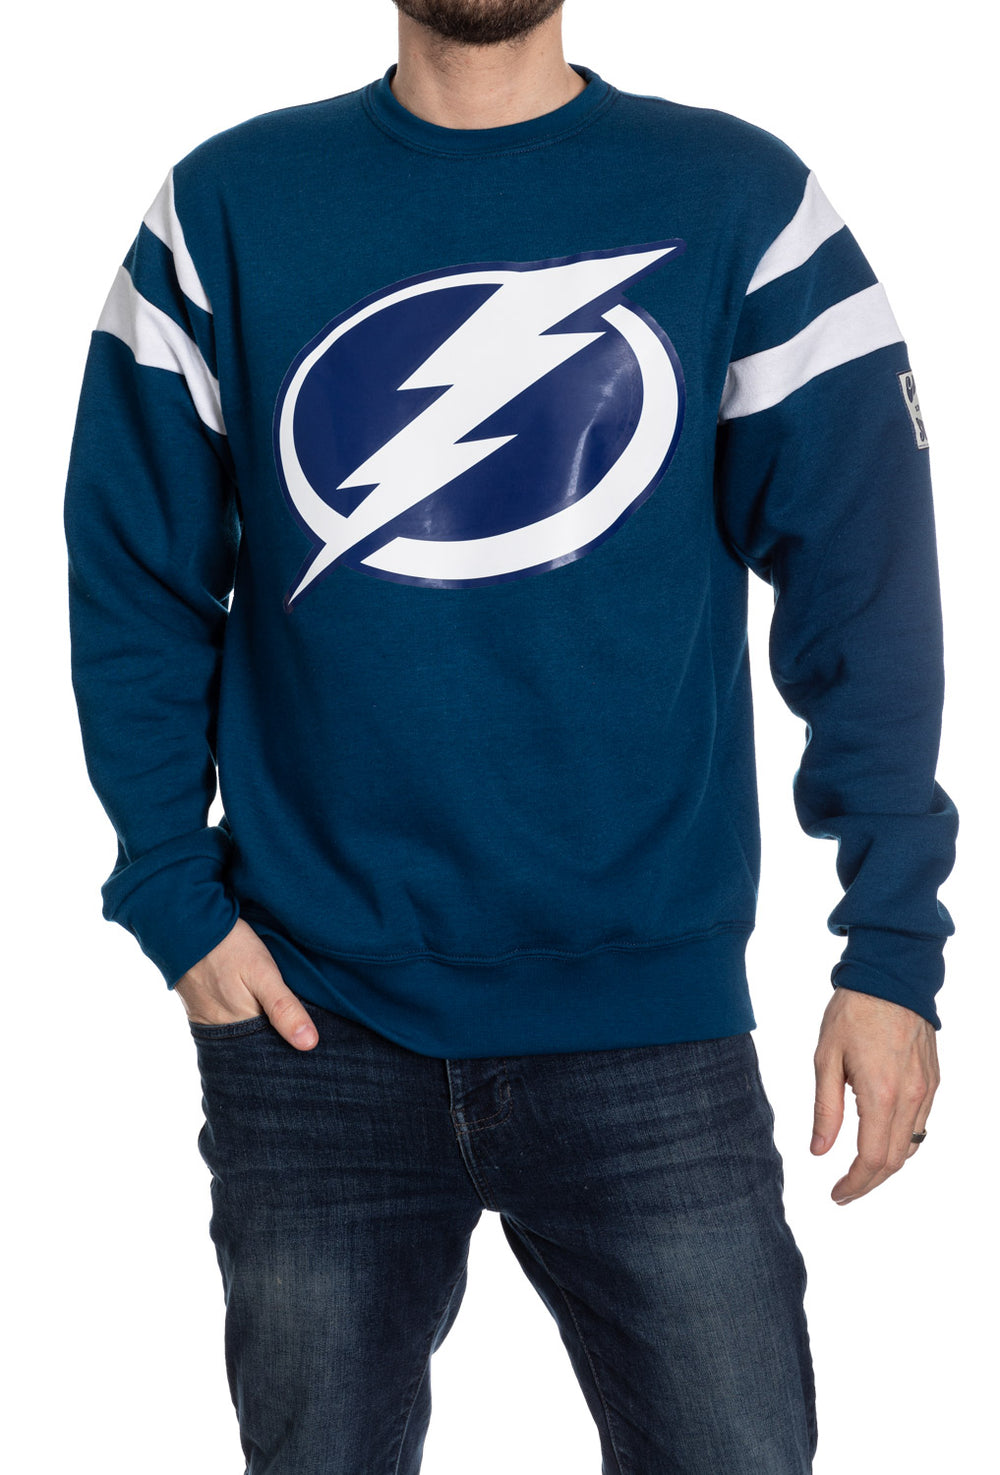 Tampa Bay Lightning is love LGBT Pride Month shirt,sweater, hoodie,  sweater, long sleeve and tank top